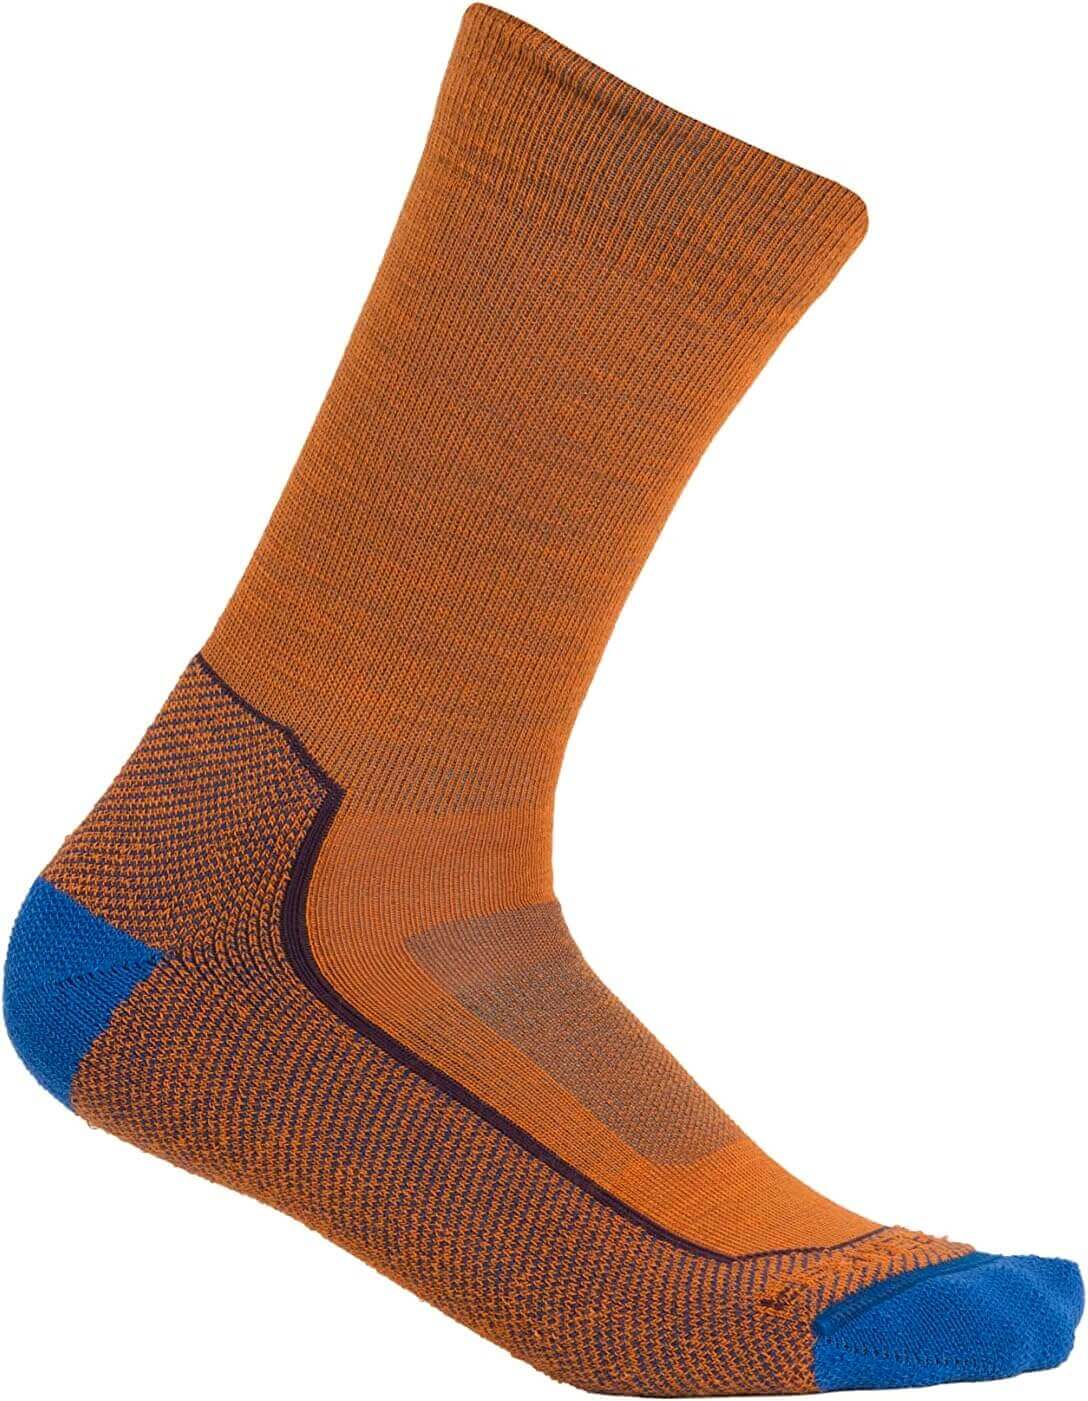 Shop The Latest >Icebreaker Merino Men's Hike+ Light Crew Sock > *Only $24.57*> From The Top Brand > *Icebreakerl* > Shop Now and Get Free Shipping On Orders Over $45.00 >*Shop Earth Foot*